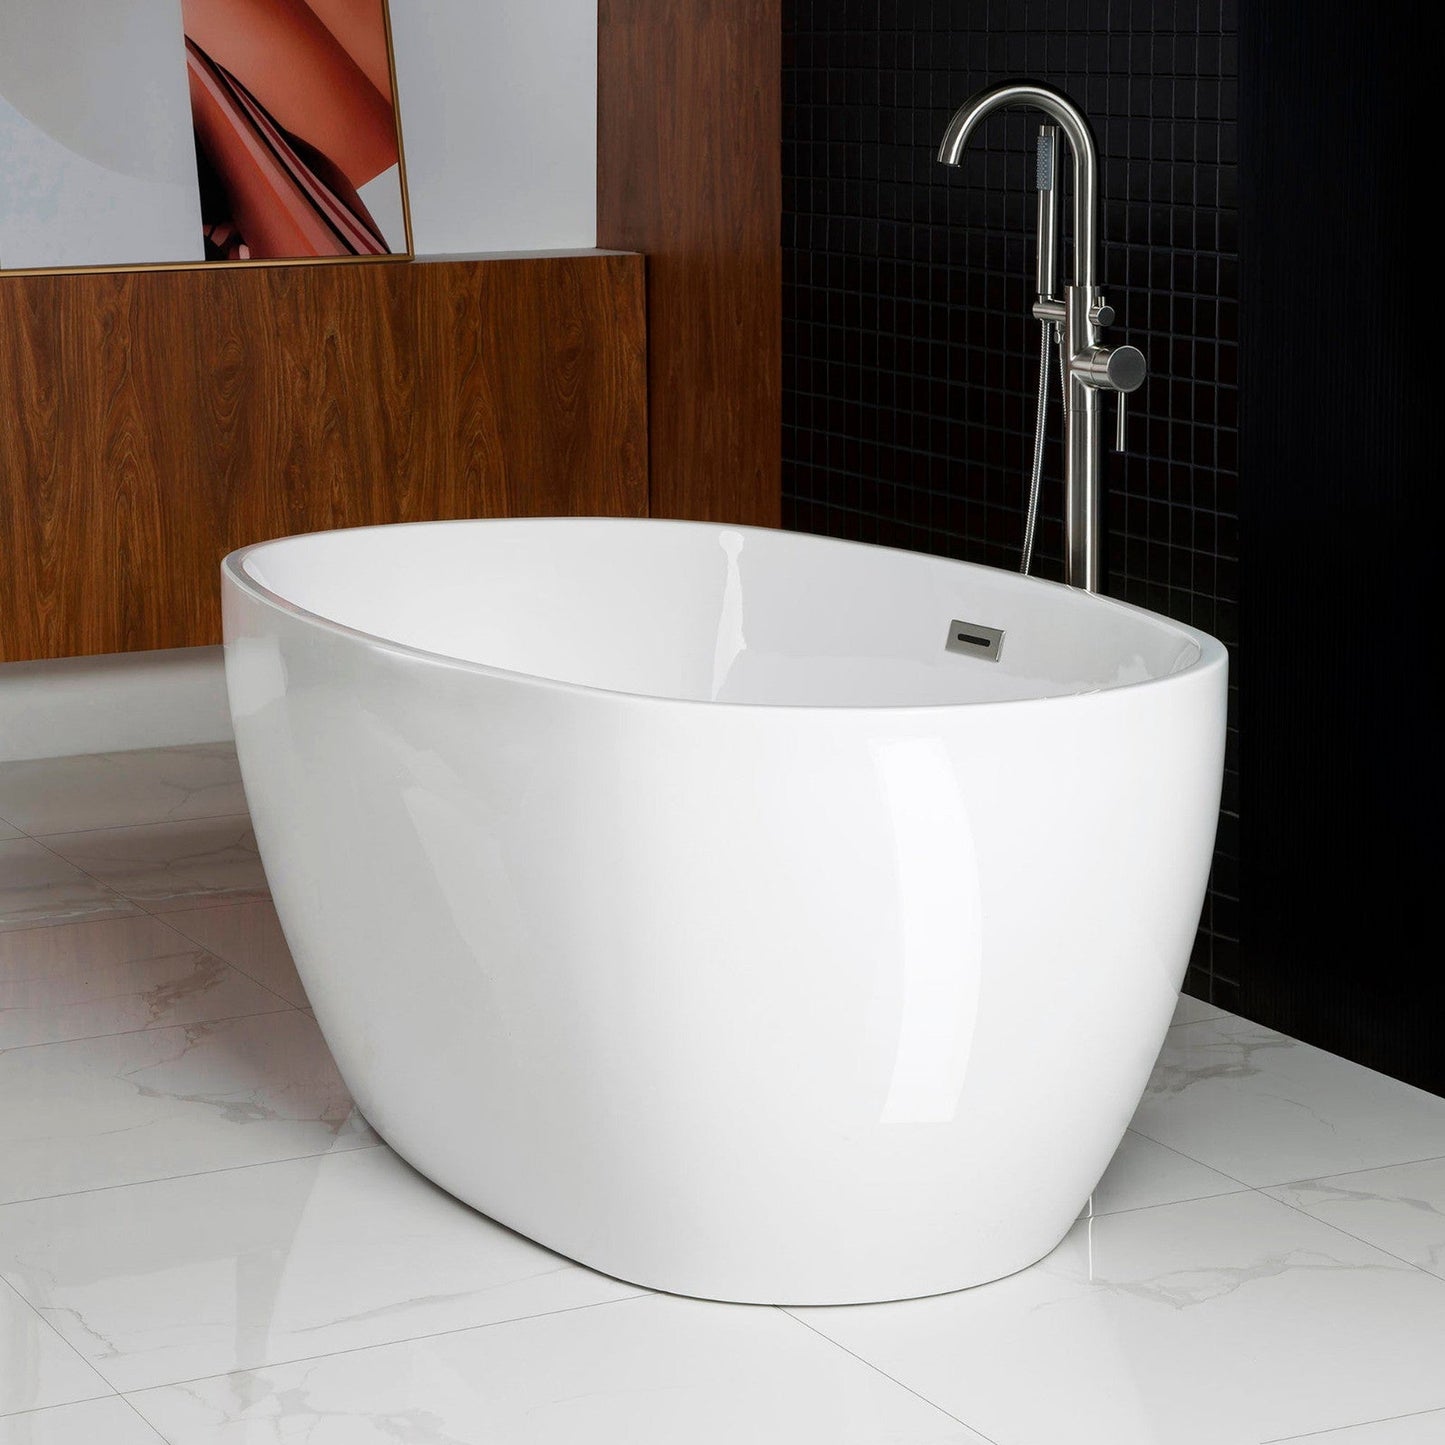 WoodBridge B0018 59" White Acrylic Freestanding Soaking Bathtub With Brushed Nickel Drain, Overflow, F0070BNVT Tub Filler and Caddy Tray